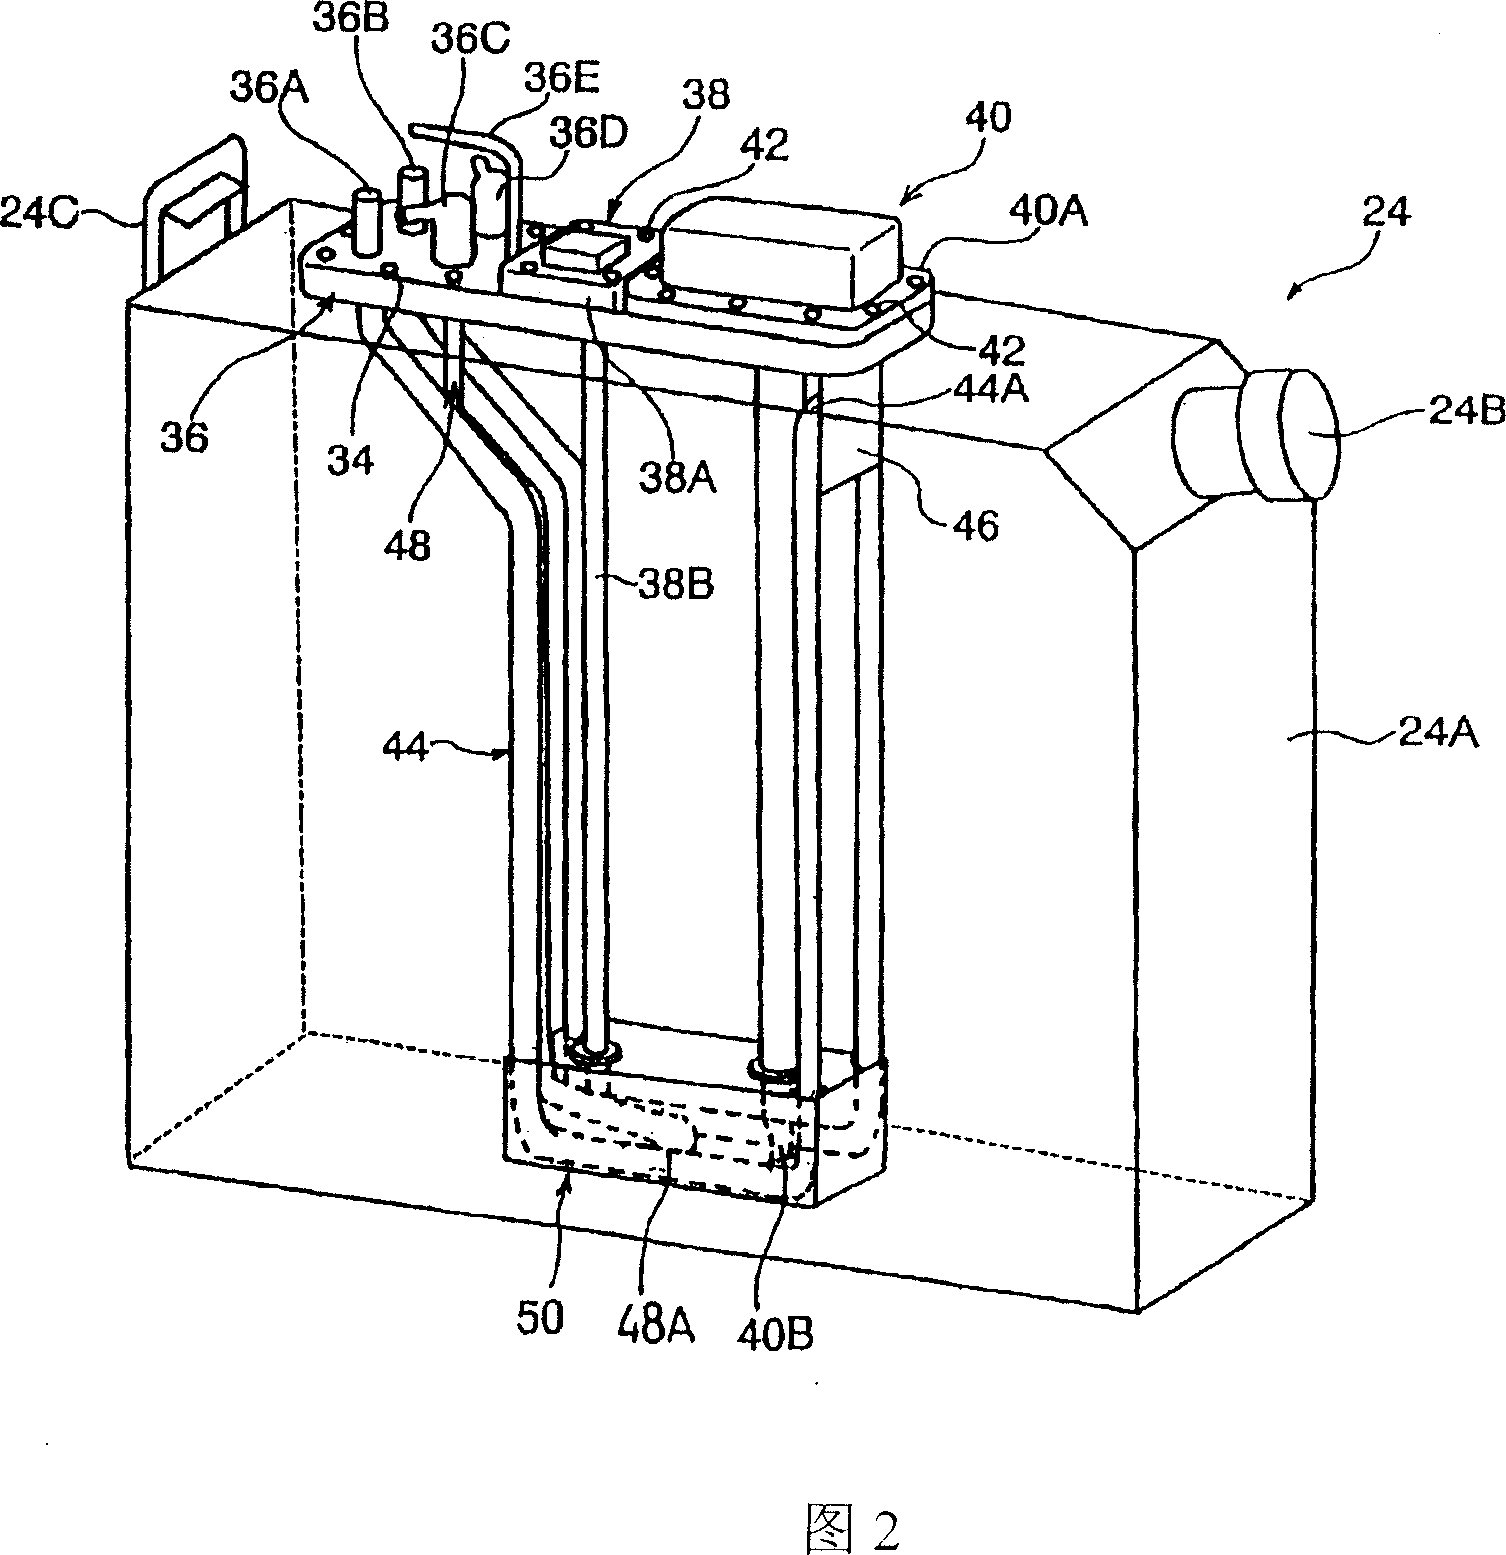 Structure of container for reducing agent